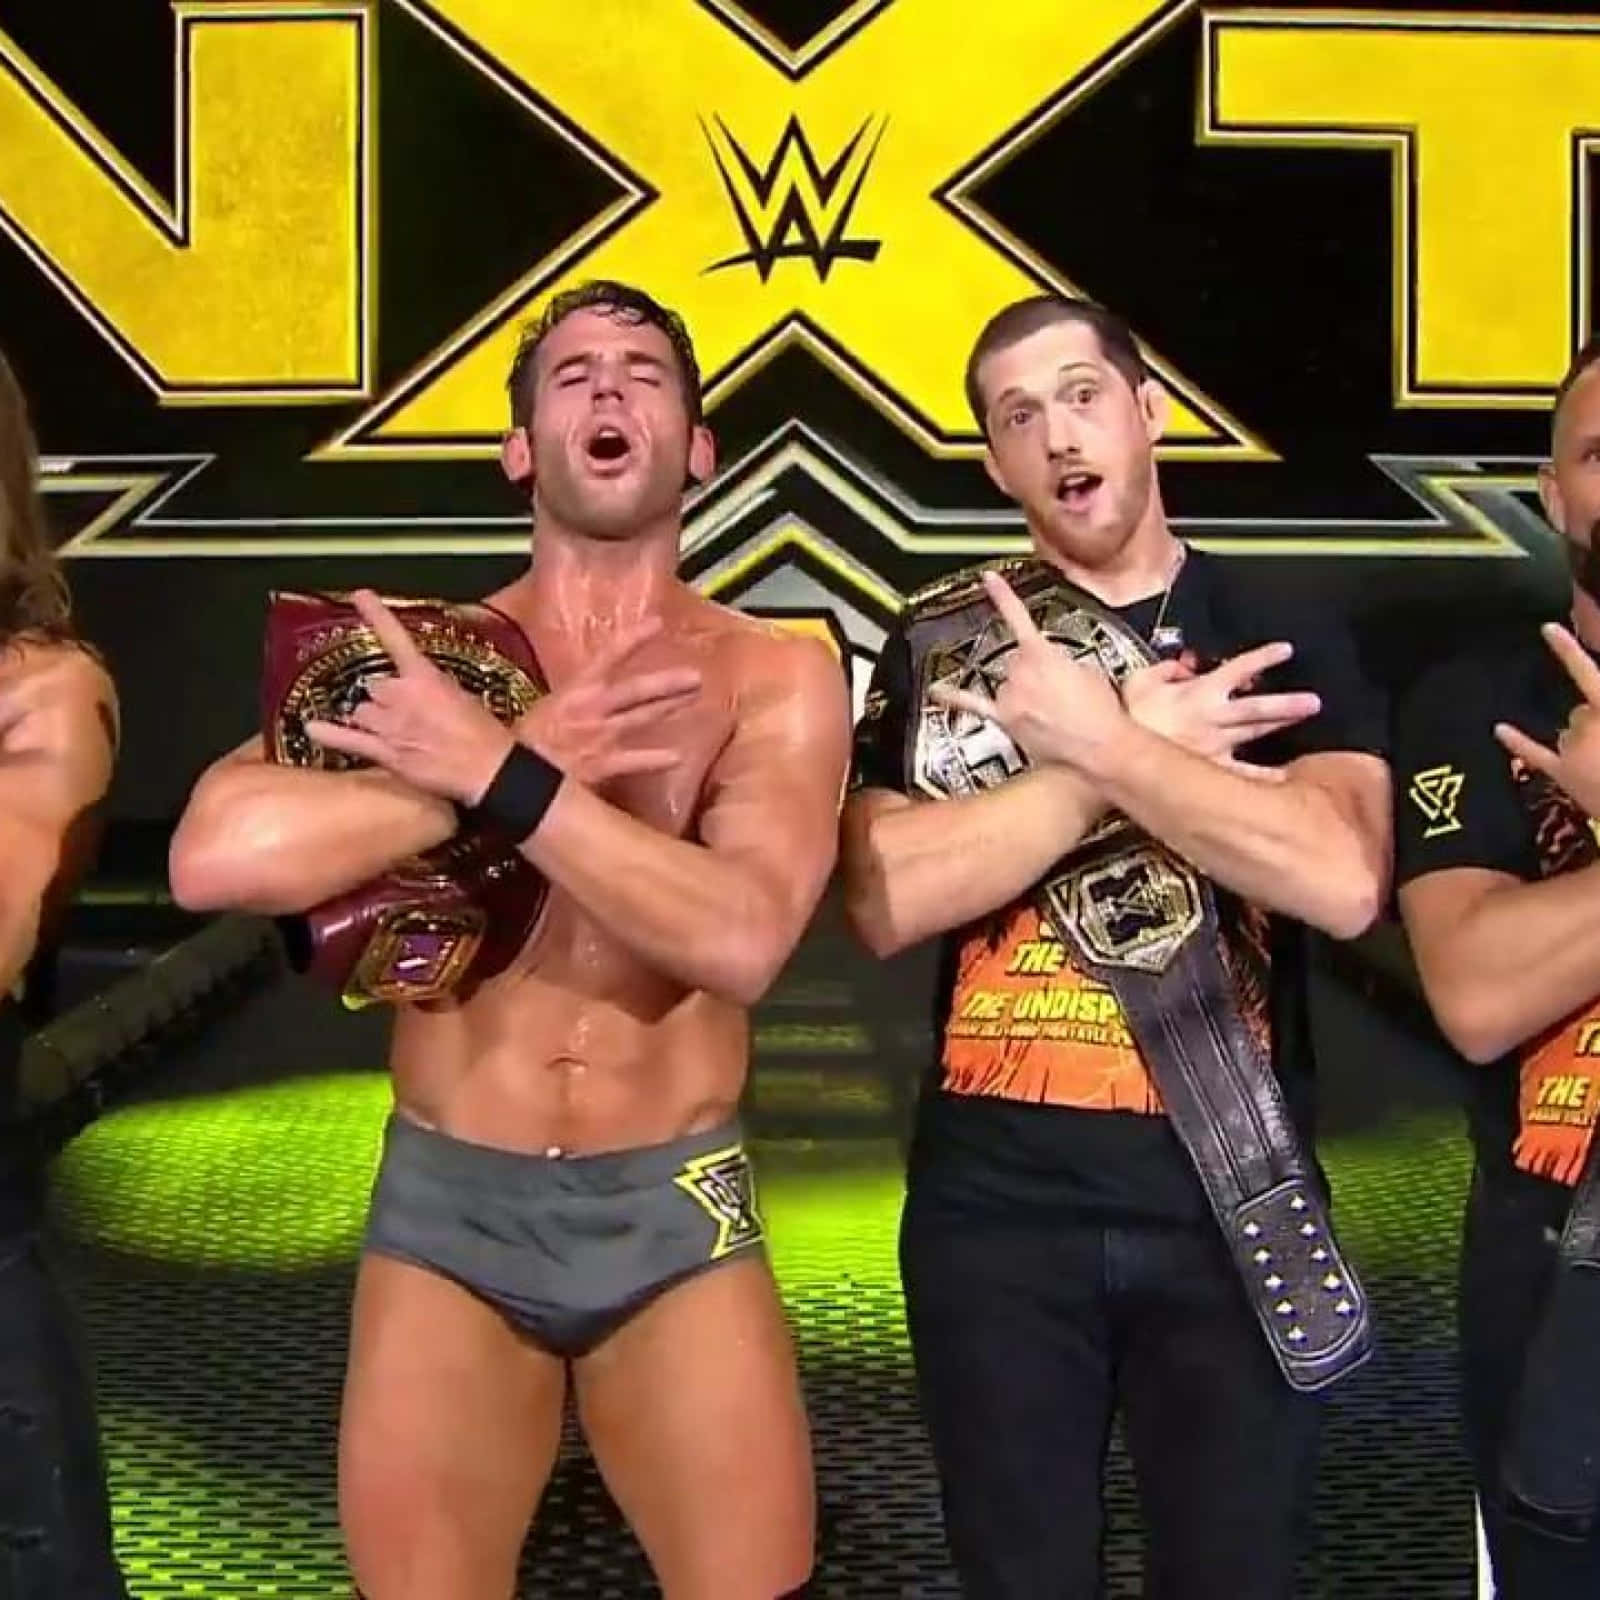 Roderick Strong making the iconic rock sign during a wrestling event Wallpaper